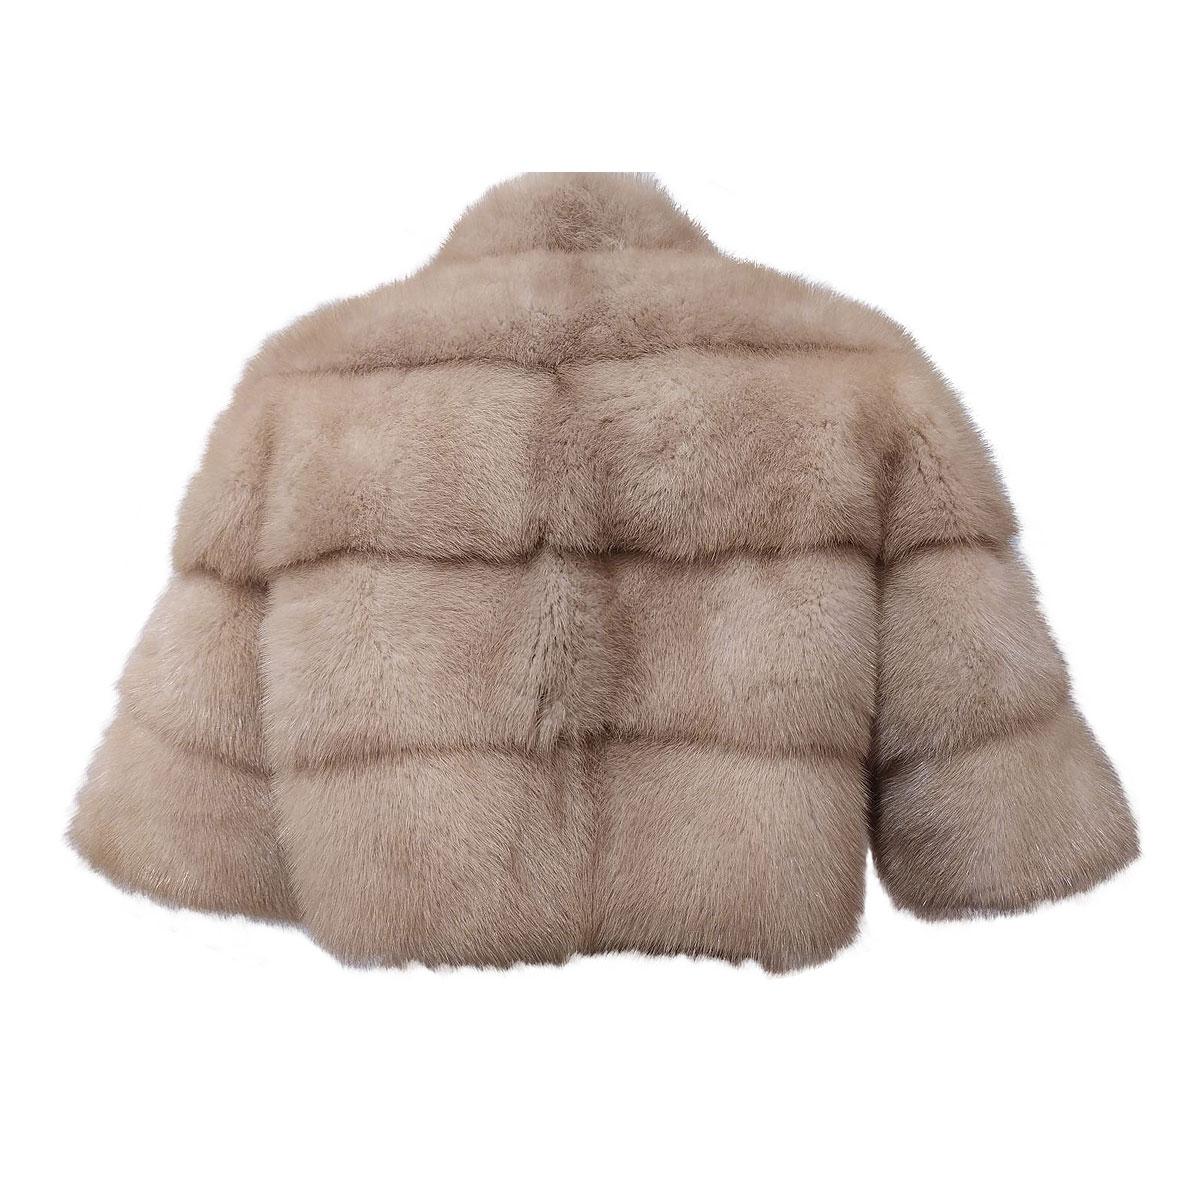 Beautiful and top quality italian made fur coat
Real mink
Shaded ivory color
Short sleeves
Two hooks closure
Length from shoulder cm 34 (13,38 inches)
Original price € 5000
Express international shipping included in the price